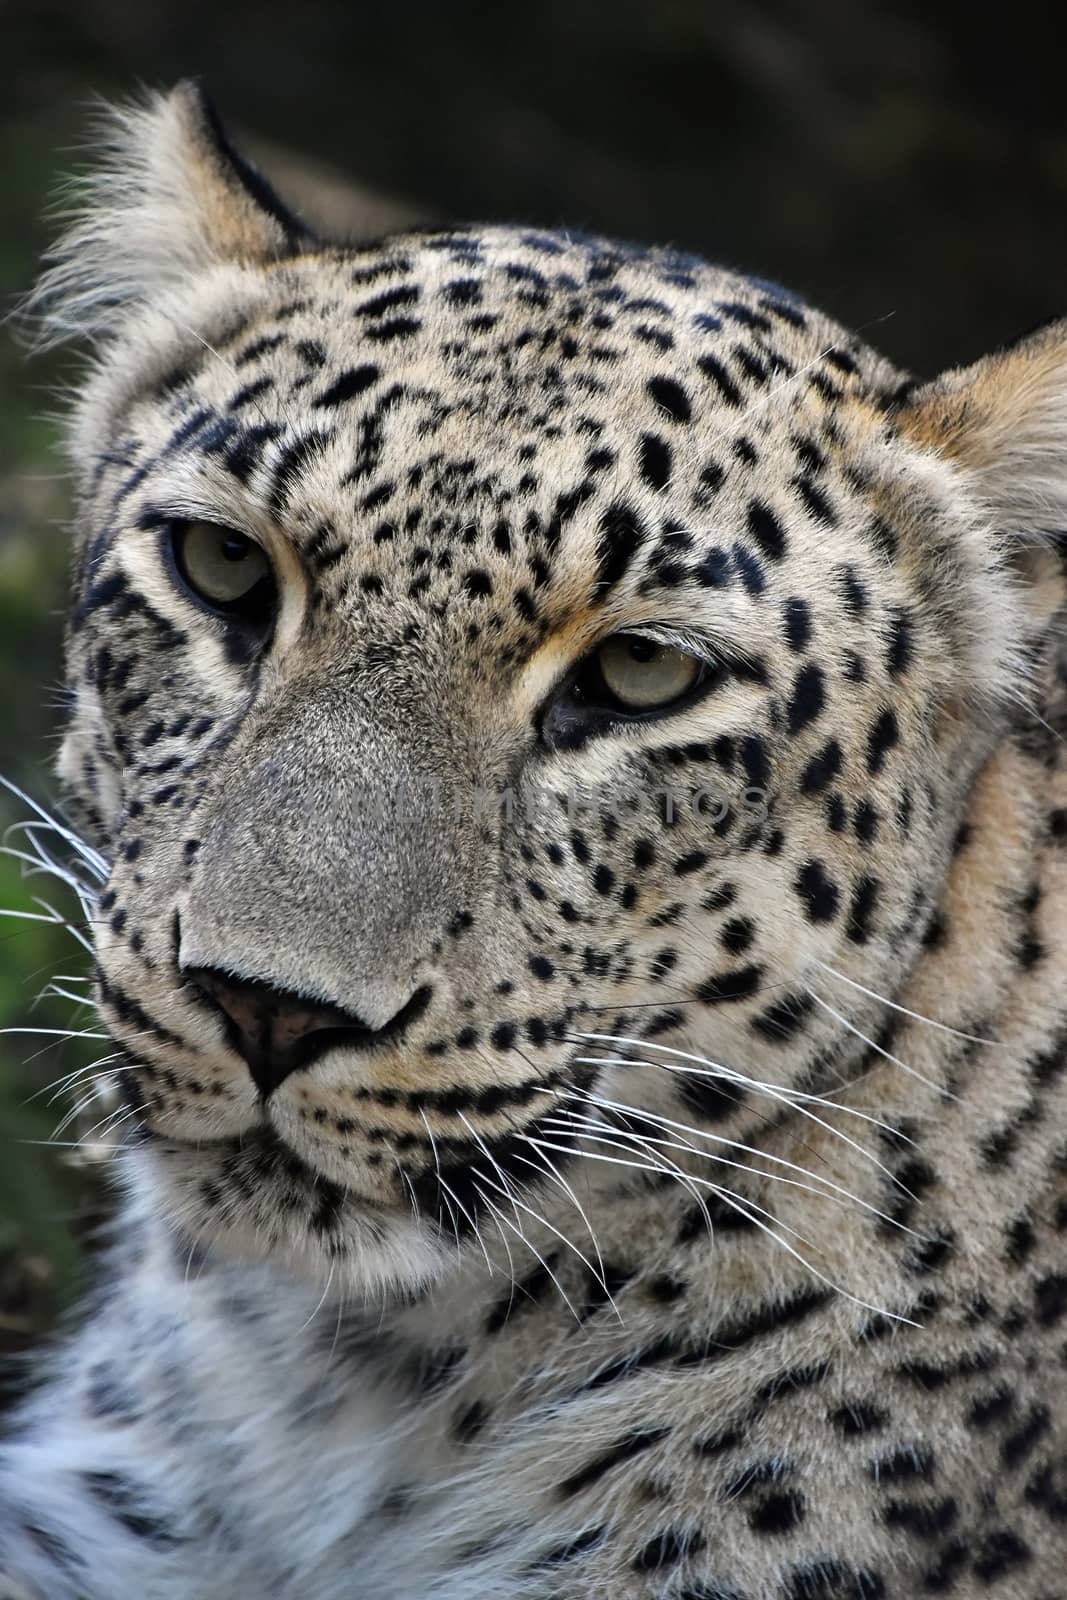 Face to face close up portrait of Amur leopard (Panthera pardus orientalis) looking at camera, low angle view